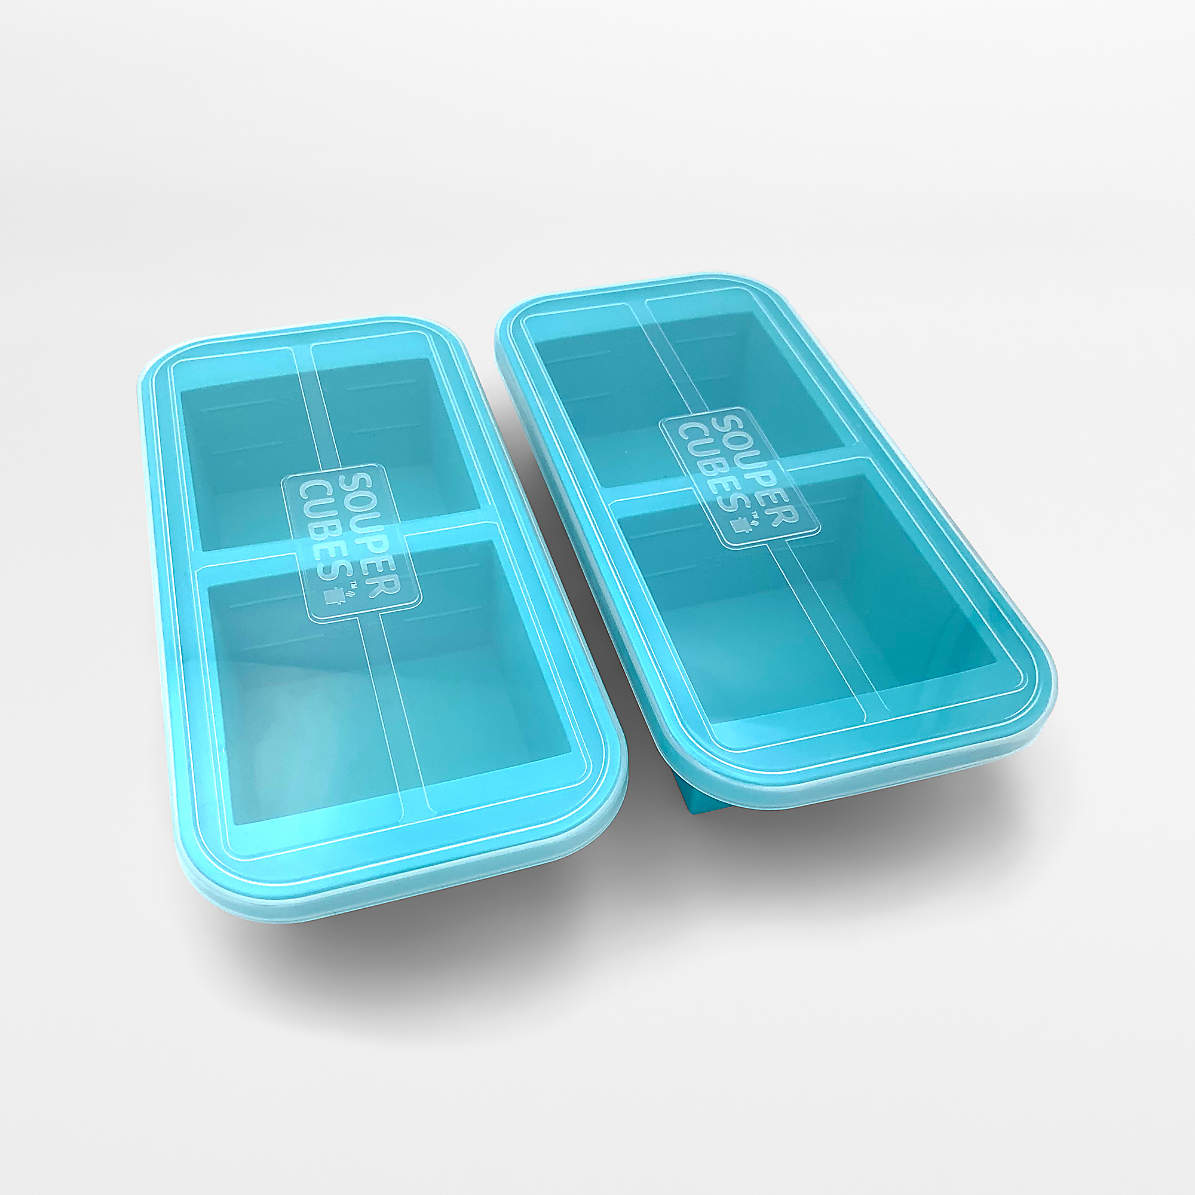  Freezer Food Trays Cubes - Stock Storage Freeze Cup Cubes with  Leakproof Lids 6 piece (3 Trays + 3 Lids) - Freezer Portion Containers -  Soup Meal Ice Cube Portion Trays